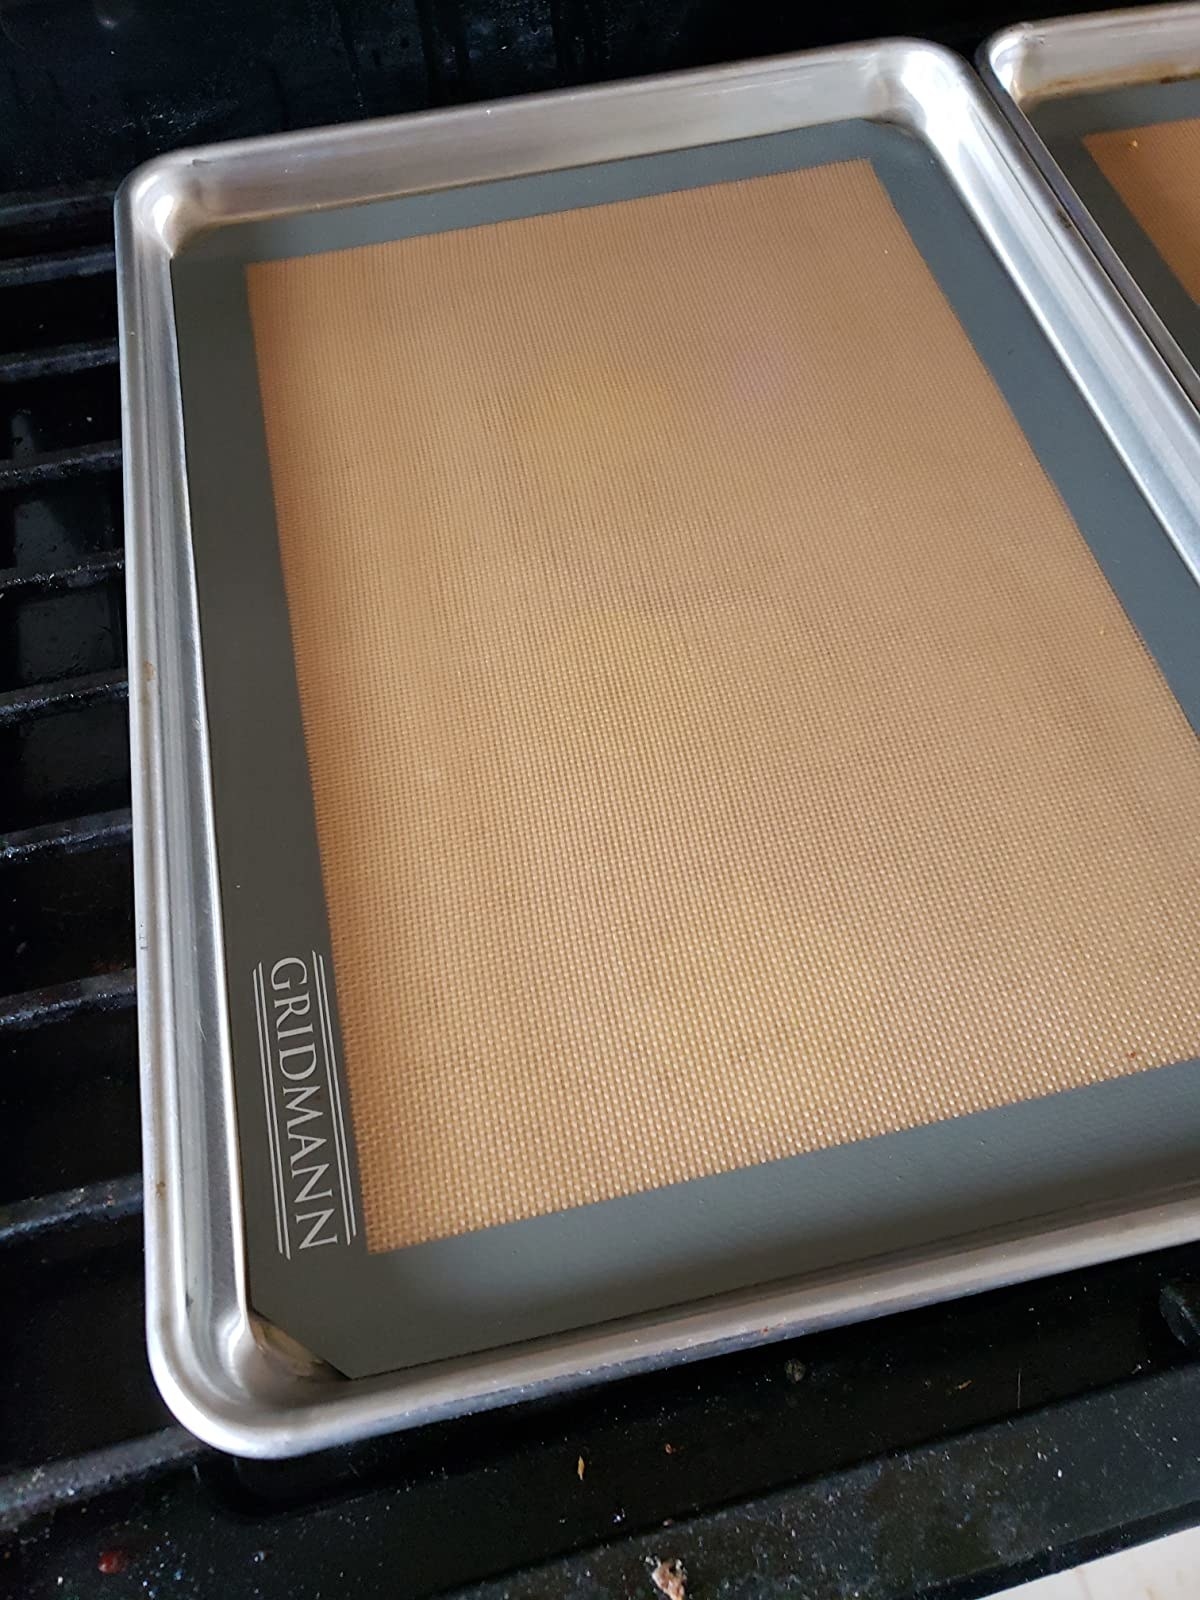 Reviewer image of gray and cream silicone baking mat on sliver baking tray